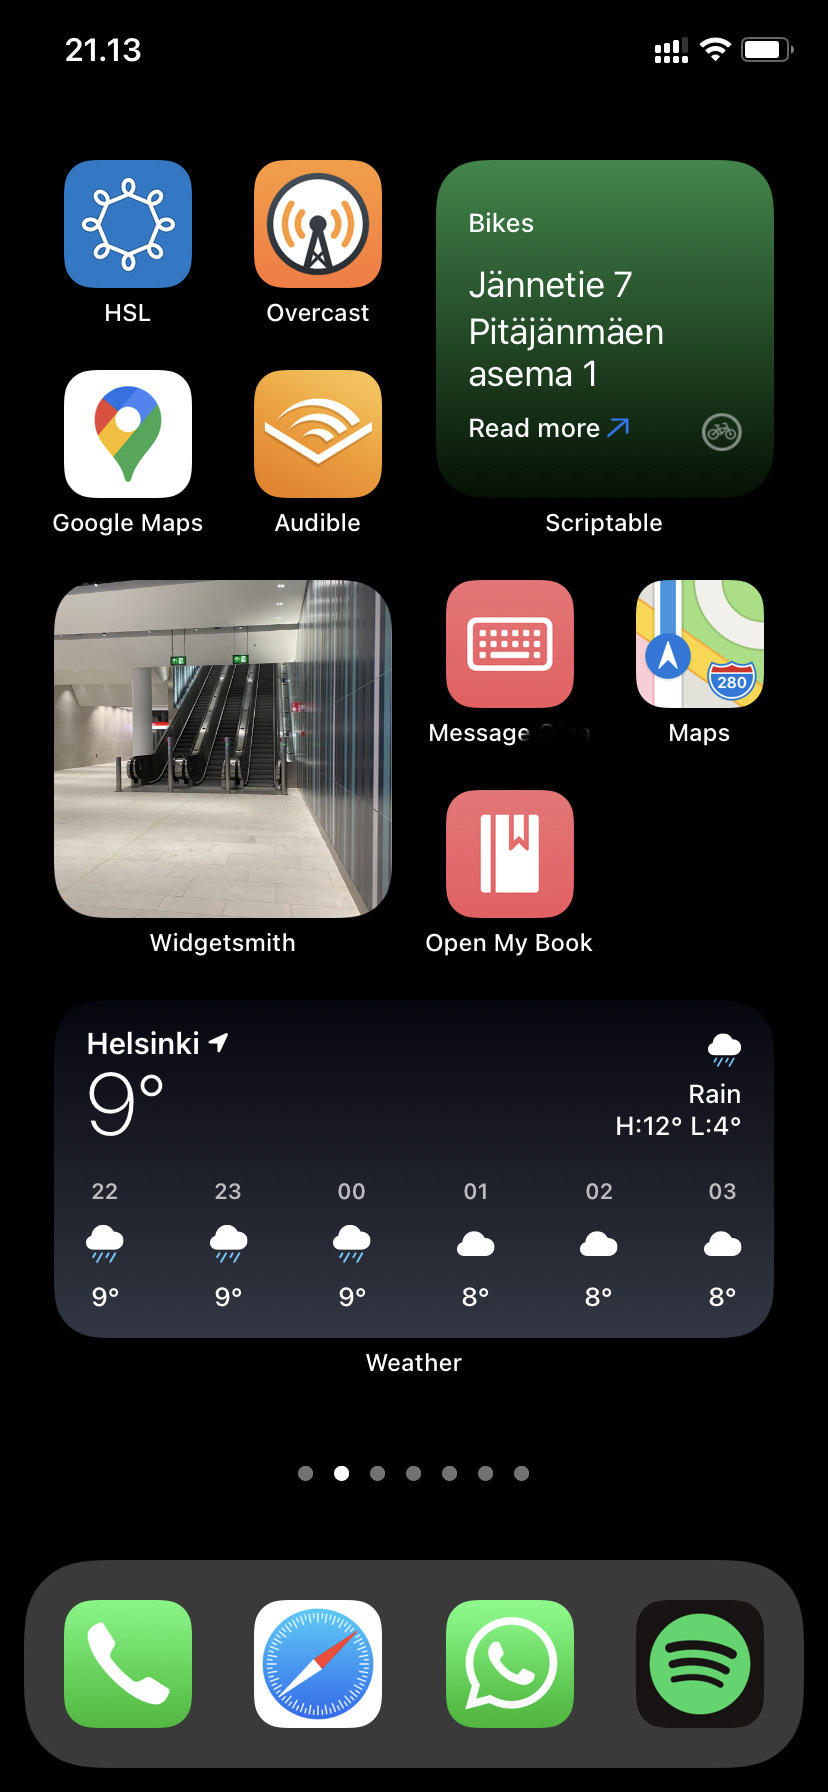 My commute home screen with transit related apps and Audible and Overcast. Widget for bikes top right